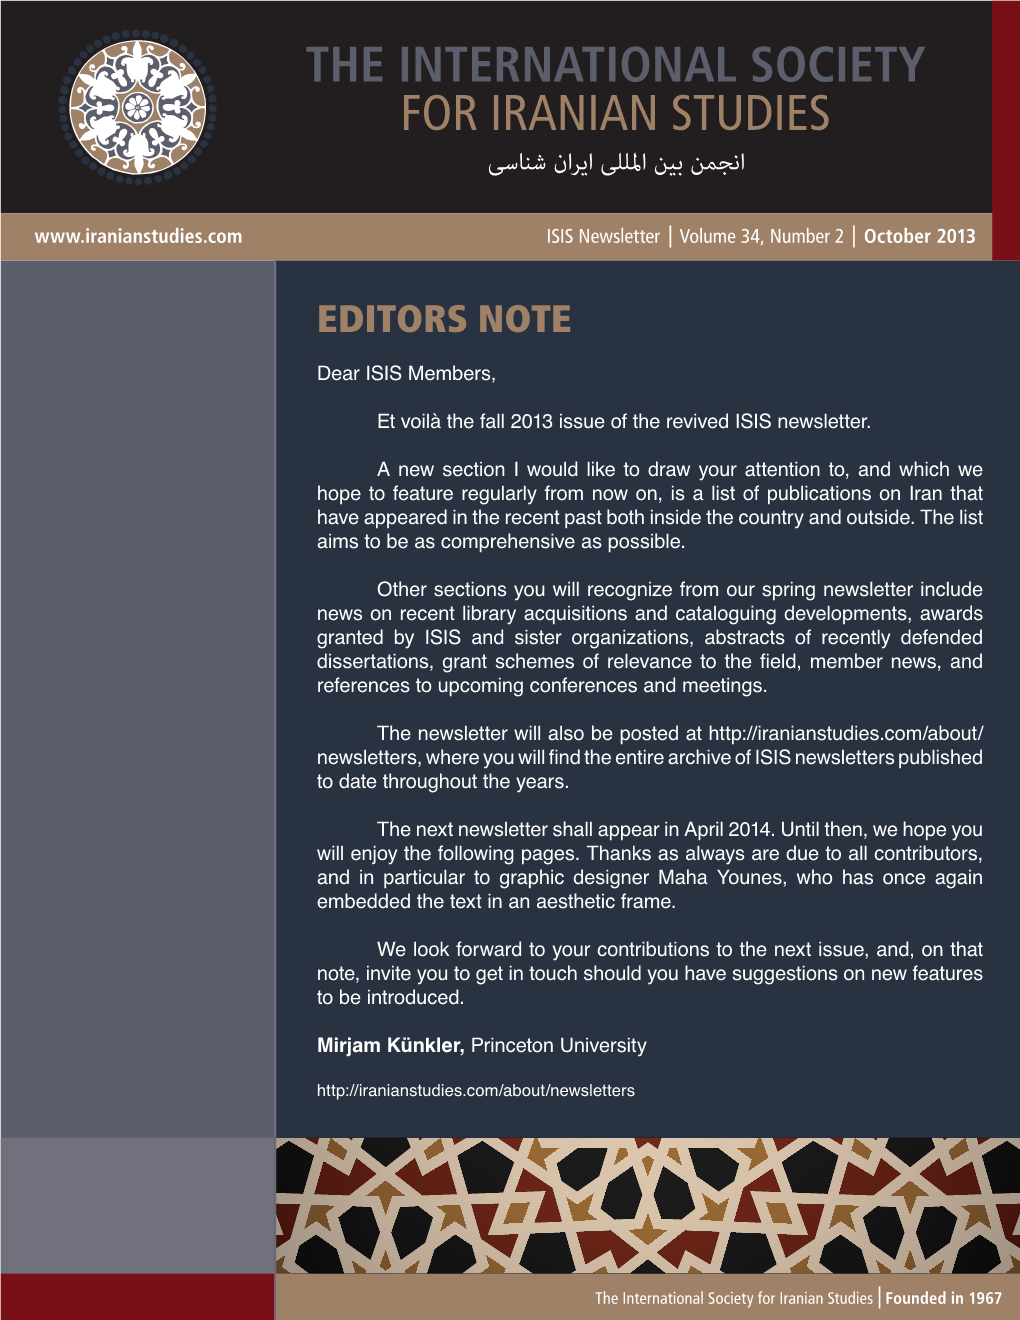 THE INTERNATIONAL SOCIETY for IRANIAN STUDIES اﻧﺠﻤﻦ ﺑﯿﻦ اﳌﻠﻠﯽ اﯾﺮان ﺷﻨﺎﺳﯽ ISIS Newsletter Volume 34, Number 2 October 2013